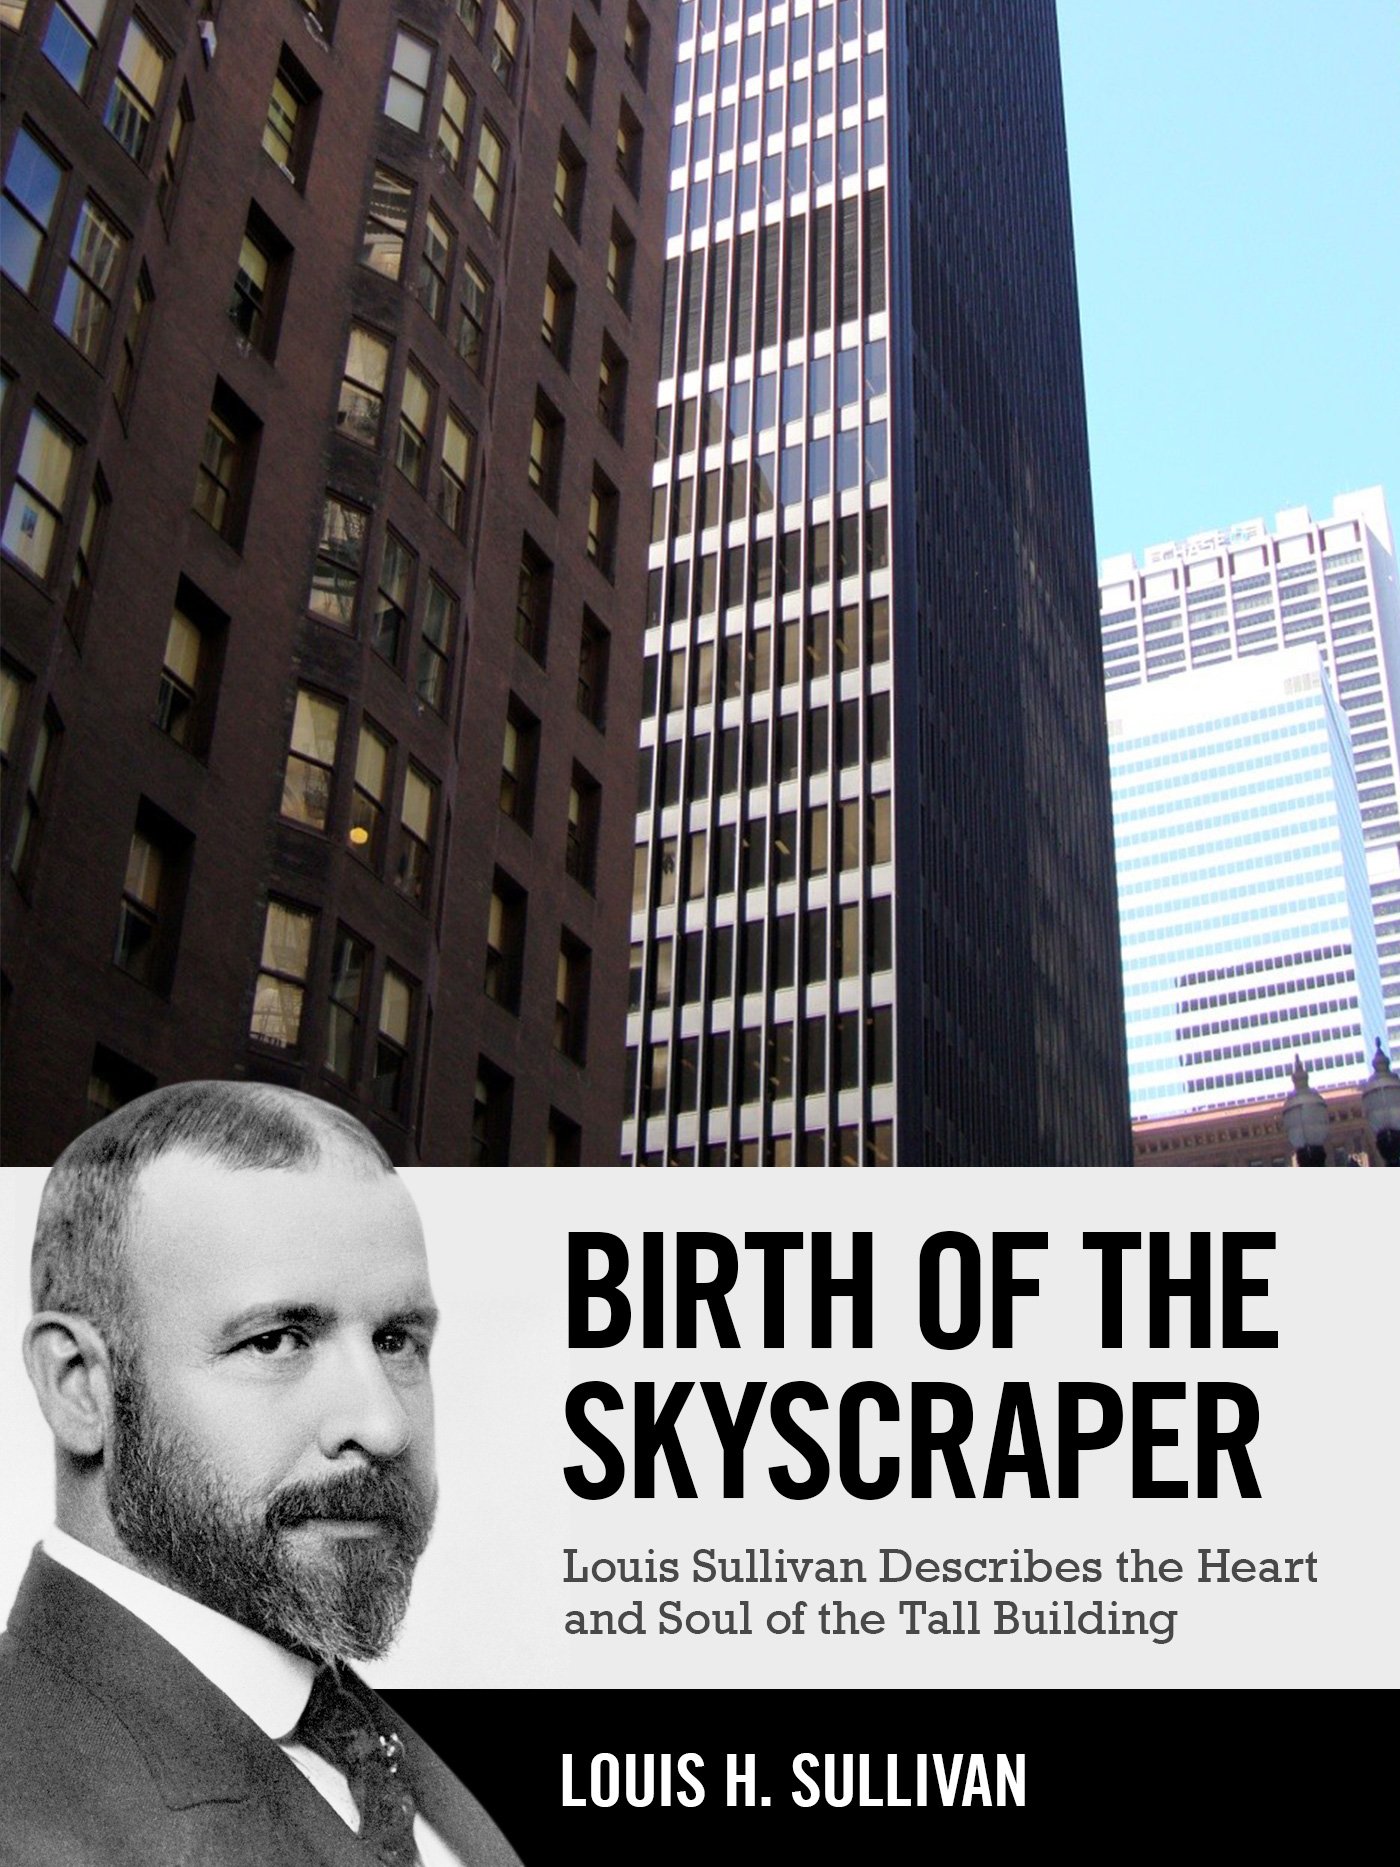 Birth of the Skyscraper: Louis Sullivan Describes the Heart and Soul of the Tall Building